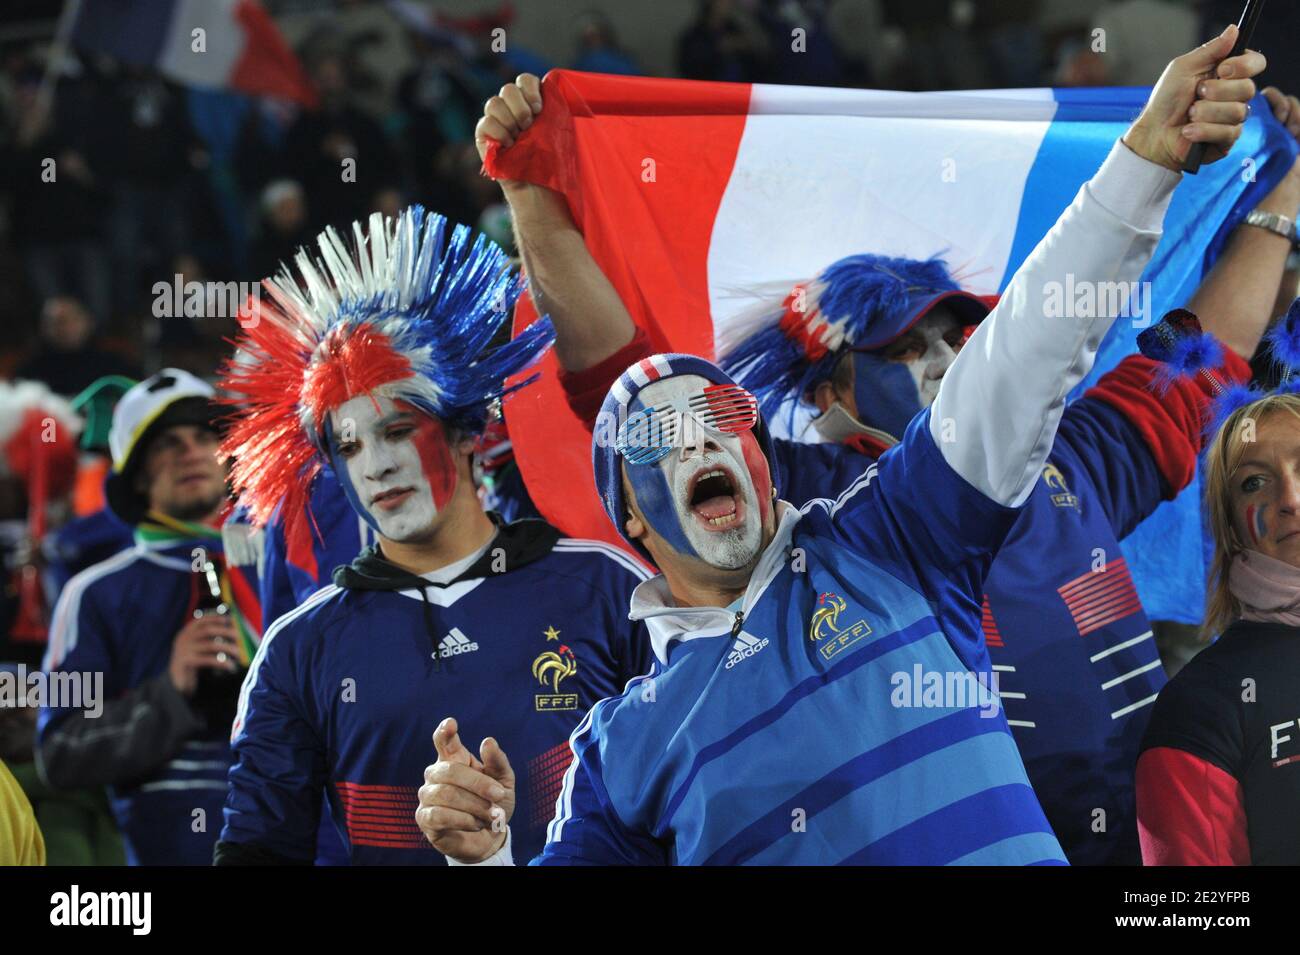 French fans demonstrate prior to the 2010 FIFA World Cup soccer match, Group A, France vs Mexico at Peter Mokaba Stadium, in Polokwane, South Africa on June 17, 2010. France won 2-0. Photo by Christophe Guibbaud/Cameleon/ABACAPRESS.COM Stock Photo